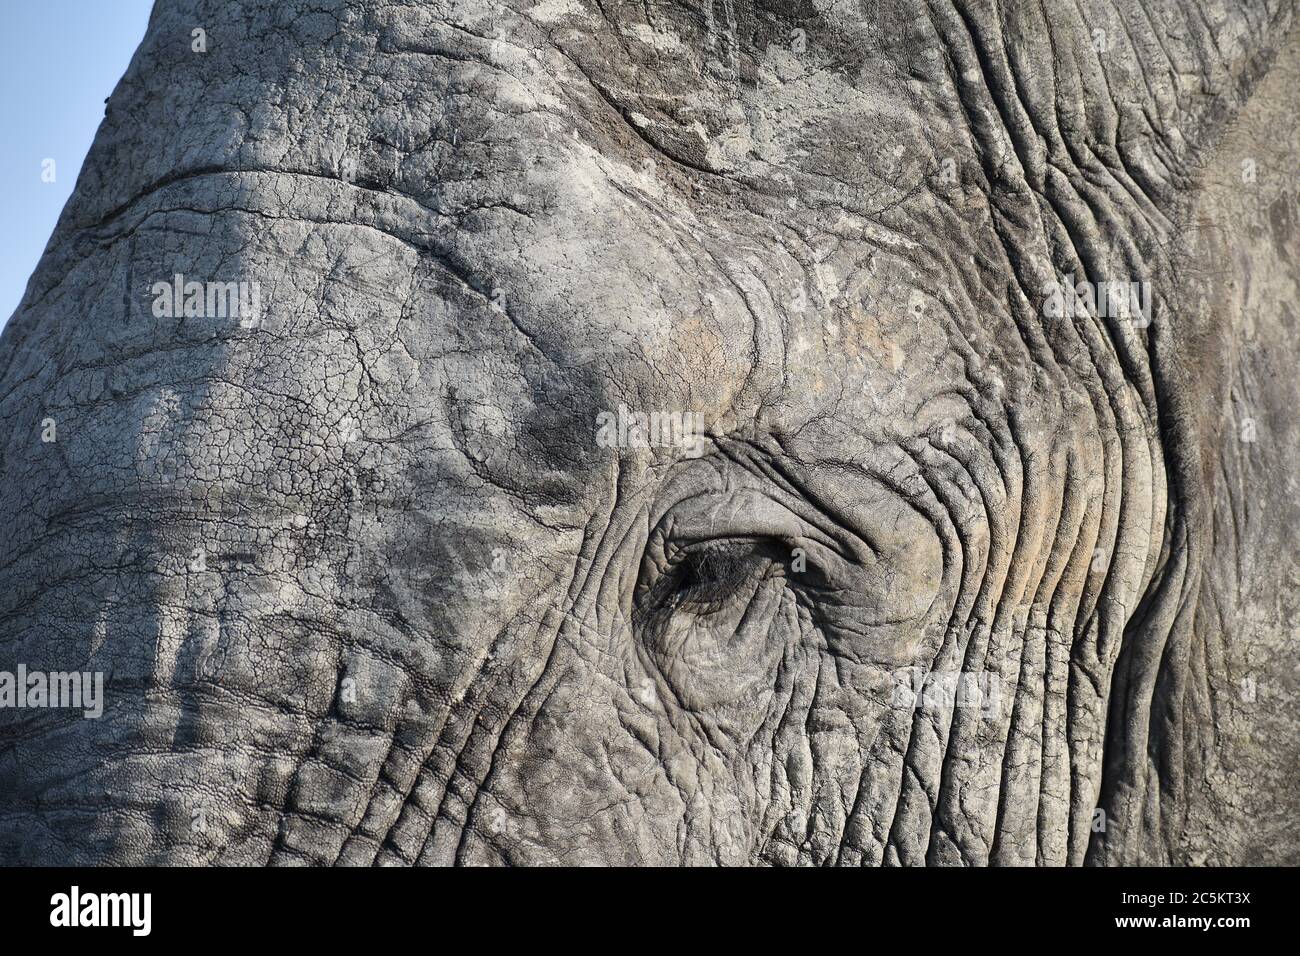 Close up of a African Elephant (Loxodonta) eye in Sabi Sands Game Reserve, Greater Kruger, South Africa.  Visible eyelashes and wrinkled grey skin. Stock Photo